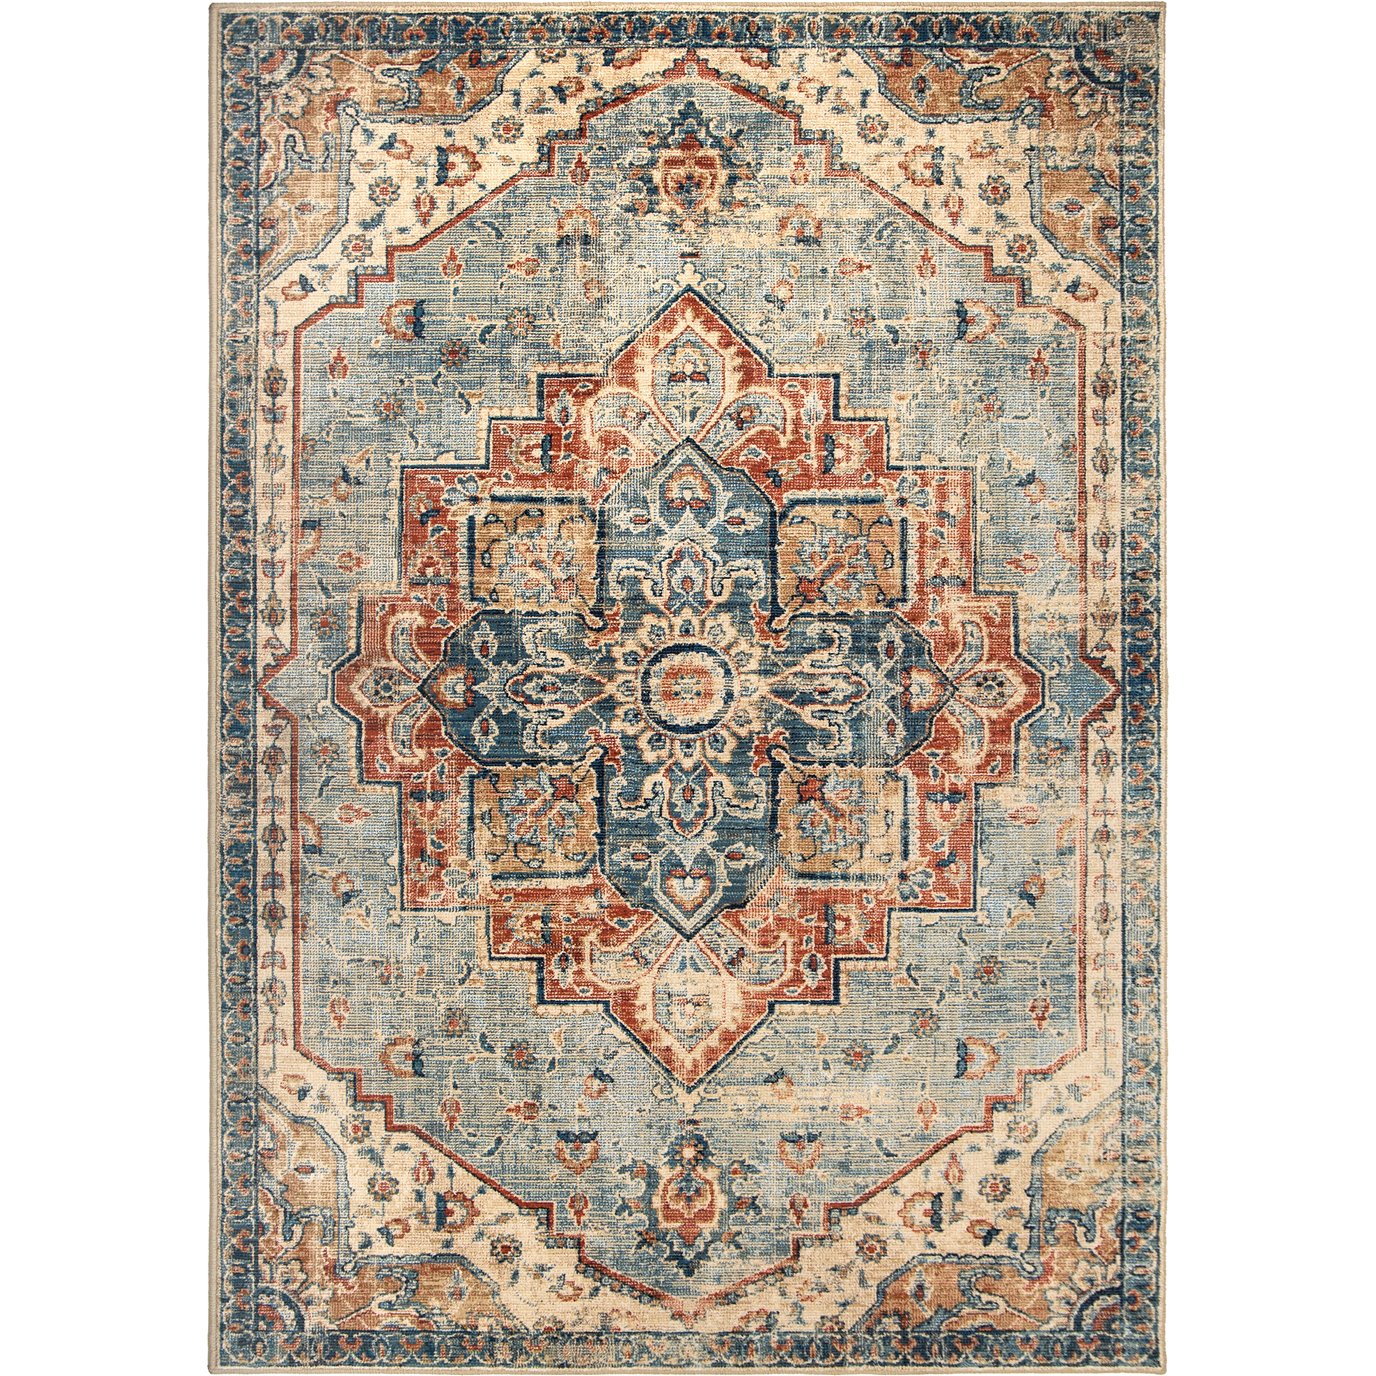 King Fisher Pale Blue 5'3"x7'6" Rug